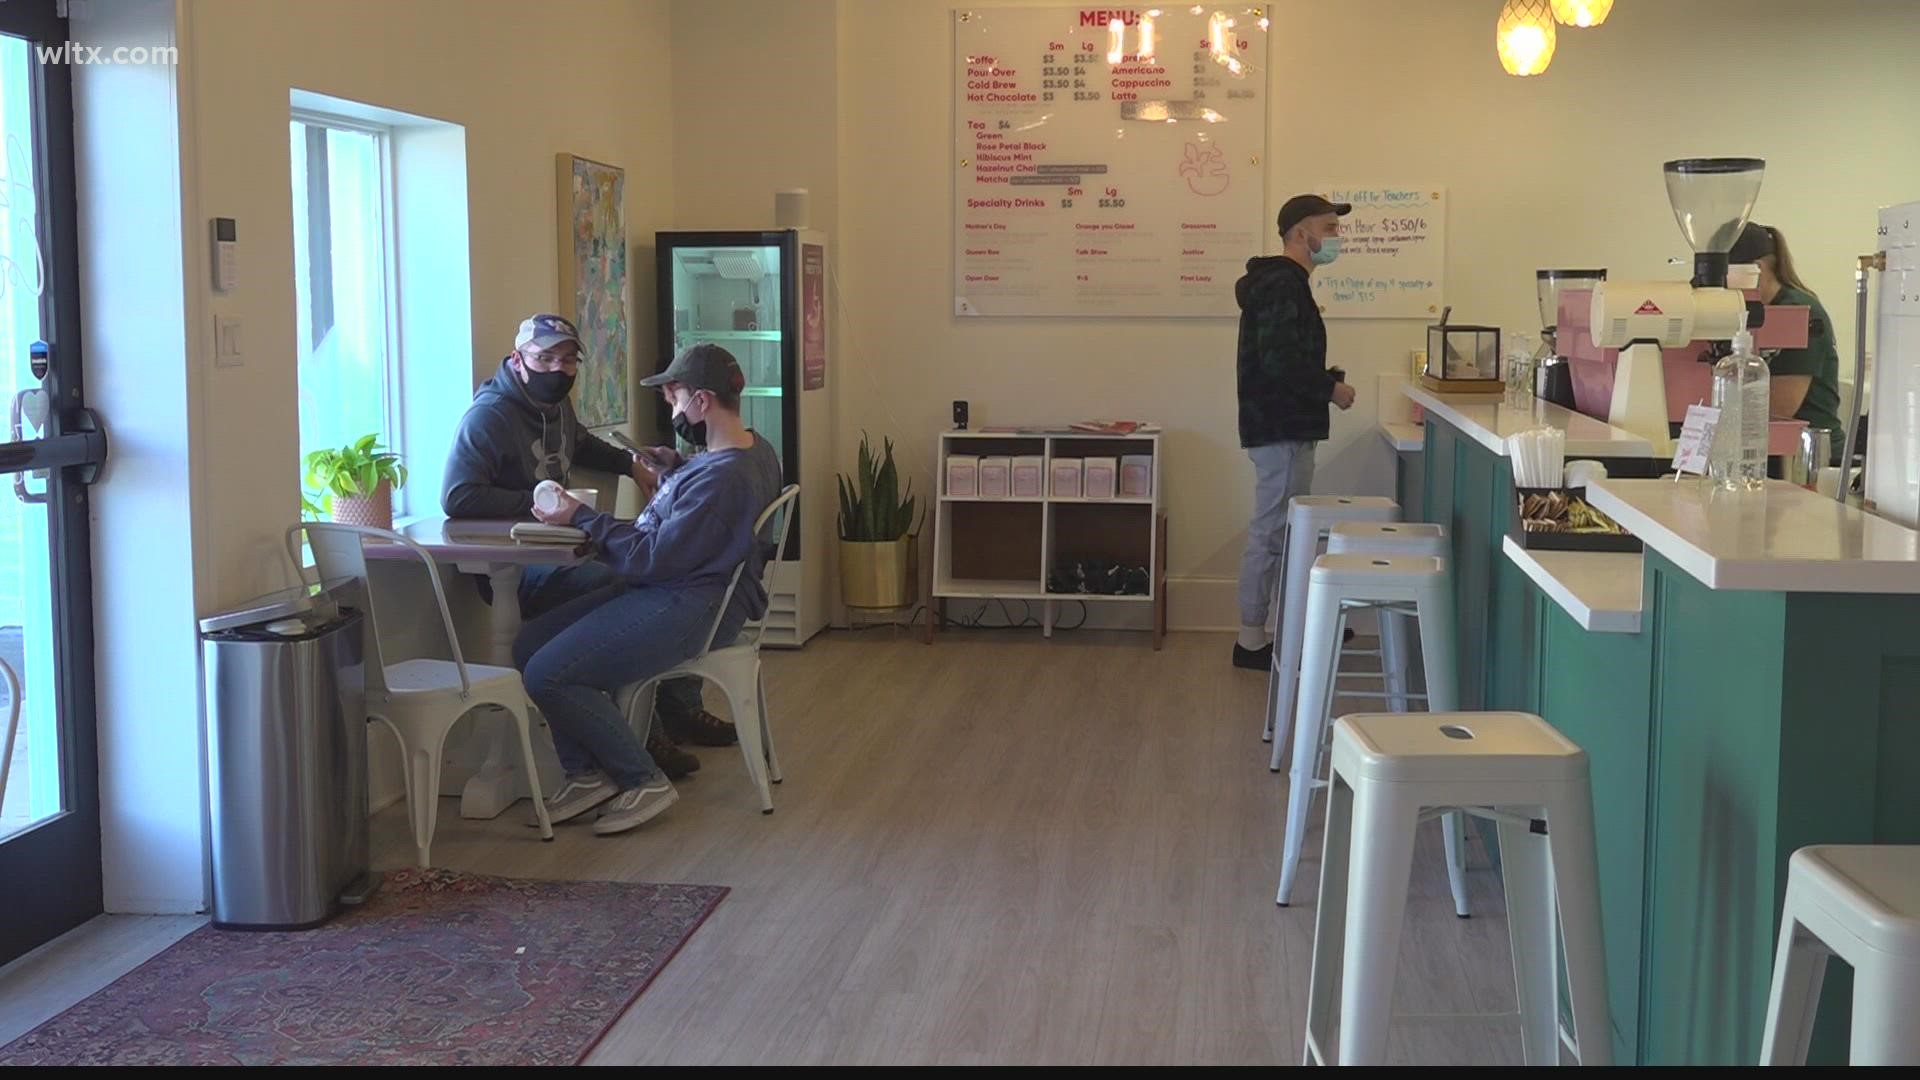 Like many small businesses, January has been a slow month for Azalea Coffee Bar. After the owner asked the community for help, customers came pouring in.